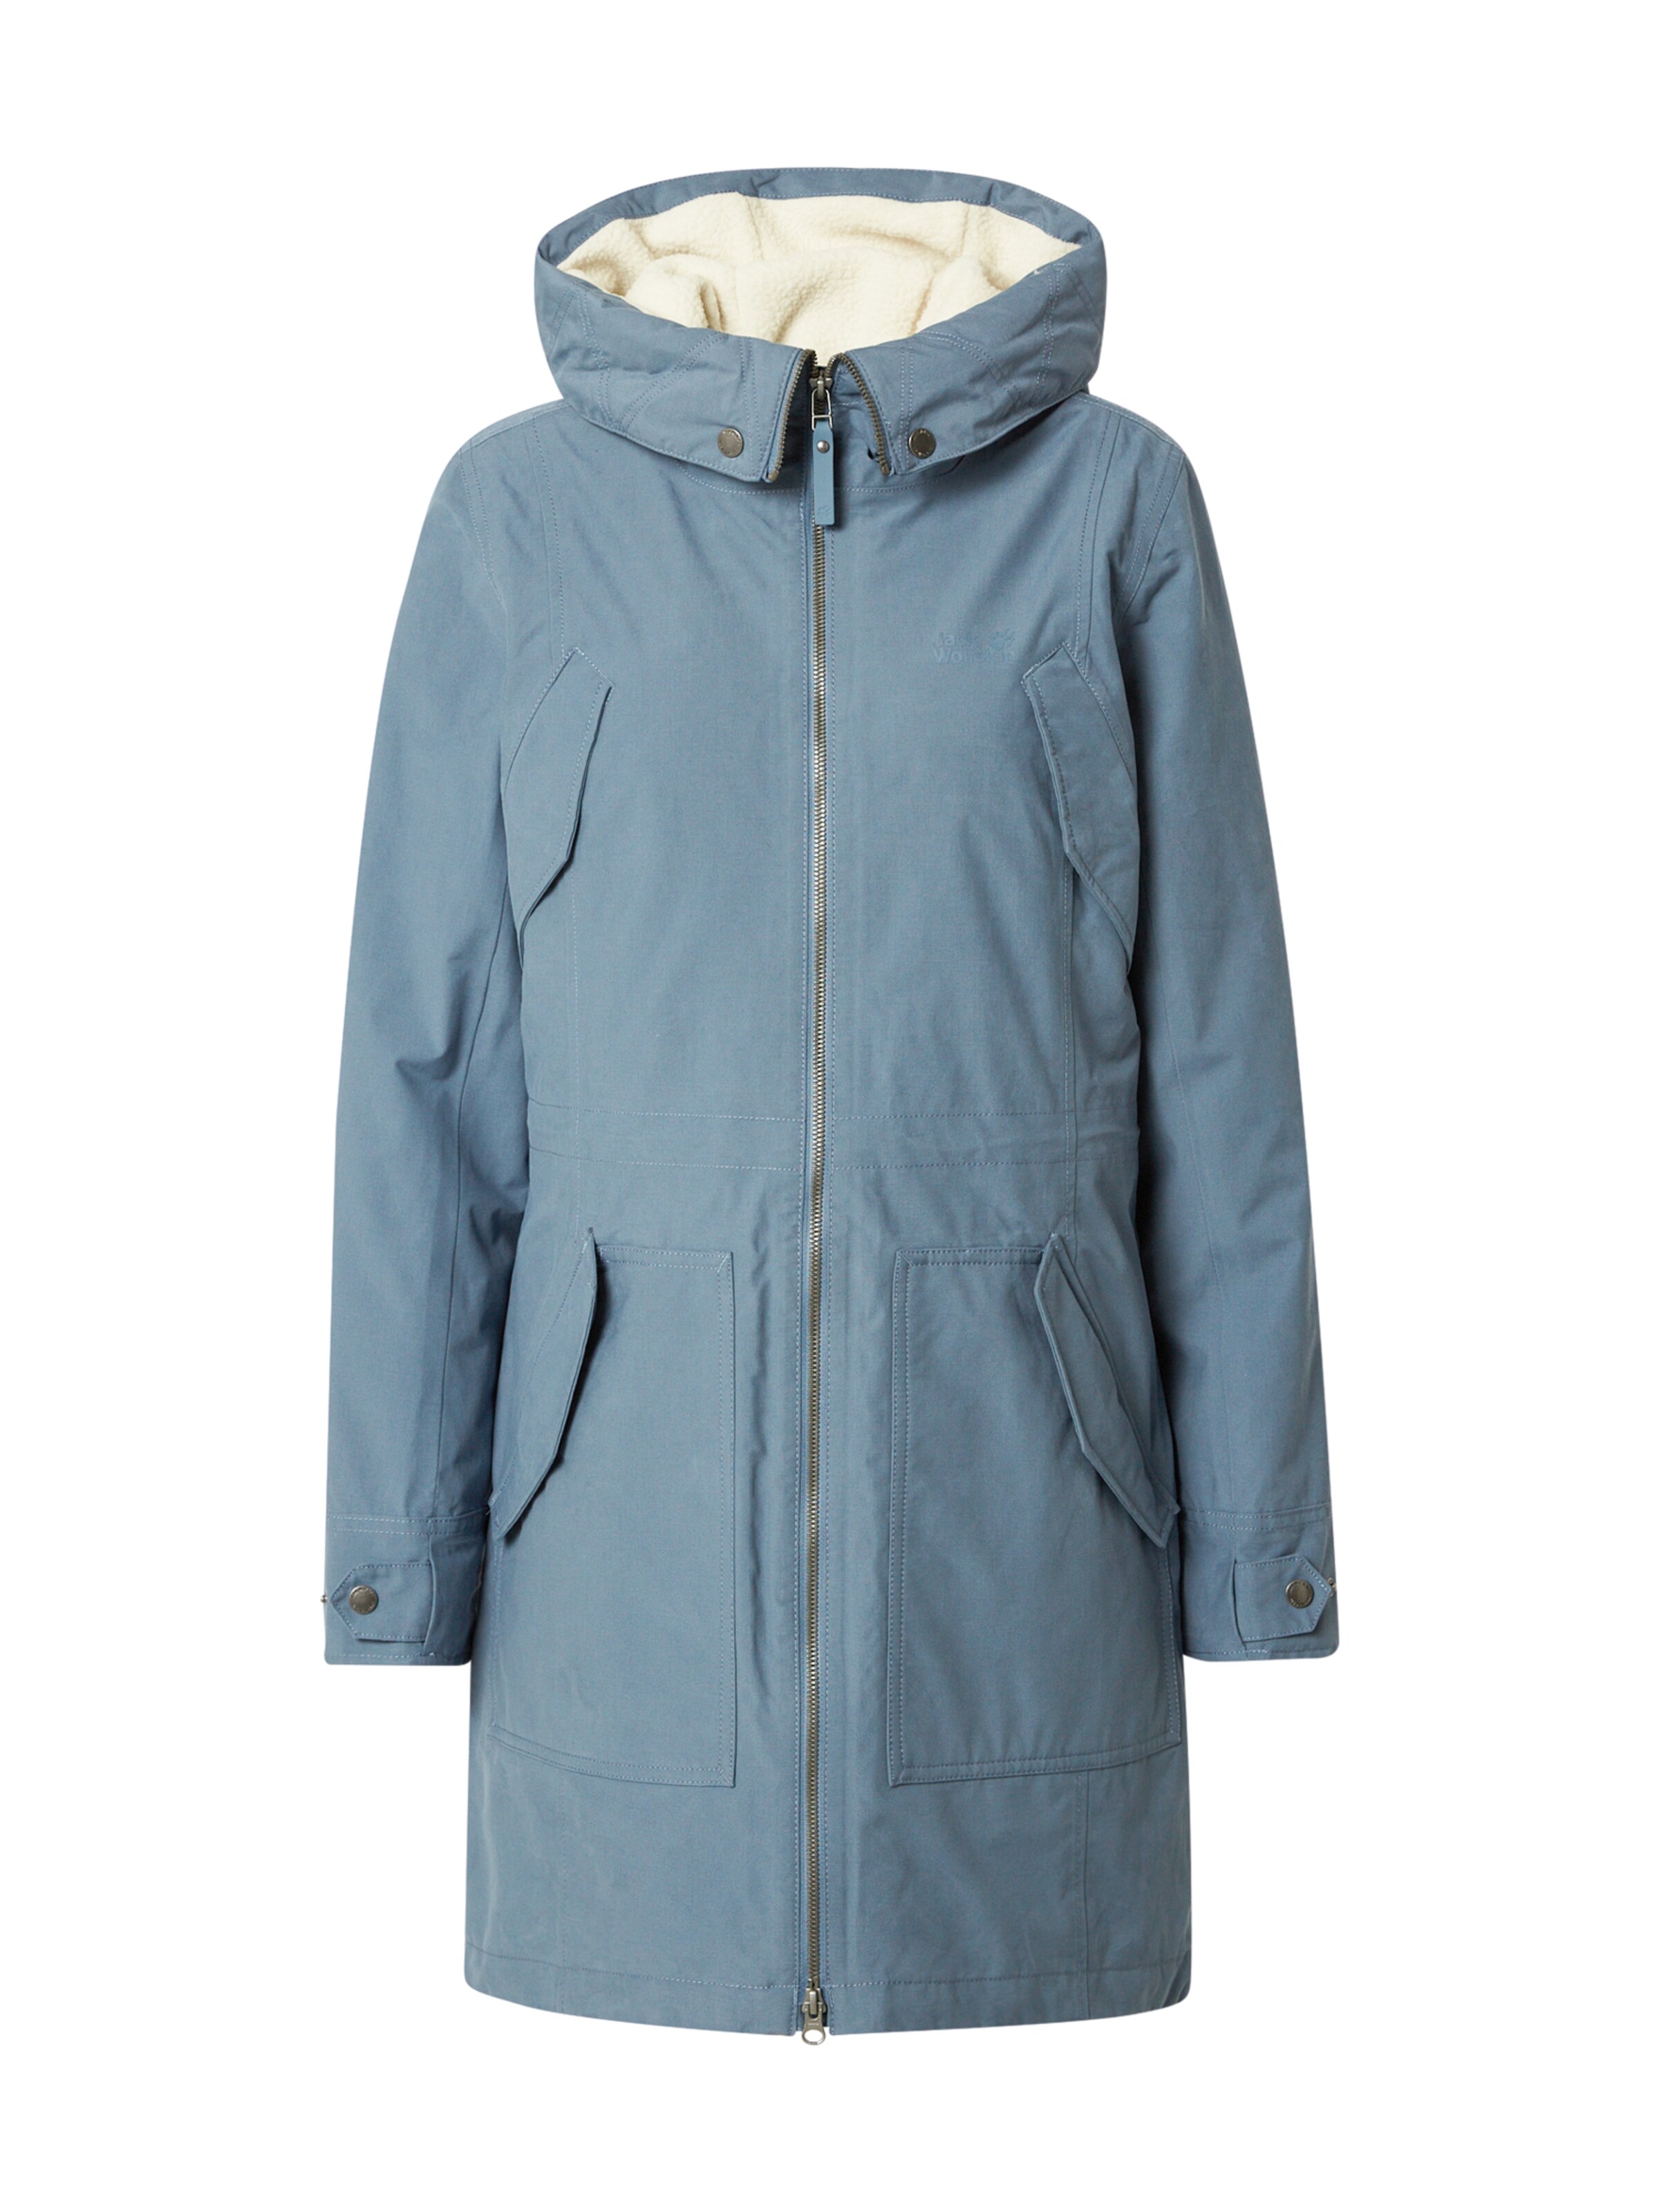 PROMO Donna JACK WOLFSKIN Giacca per outdoor ROCKY POINT in Blu Fumo 